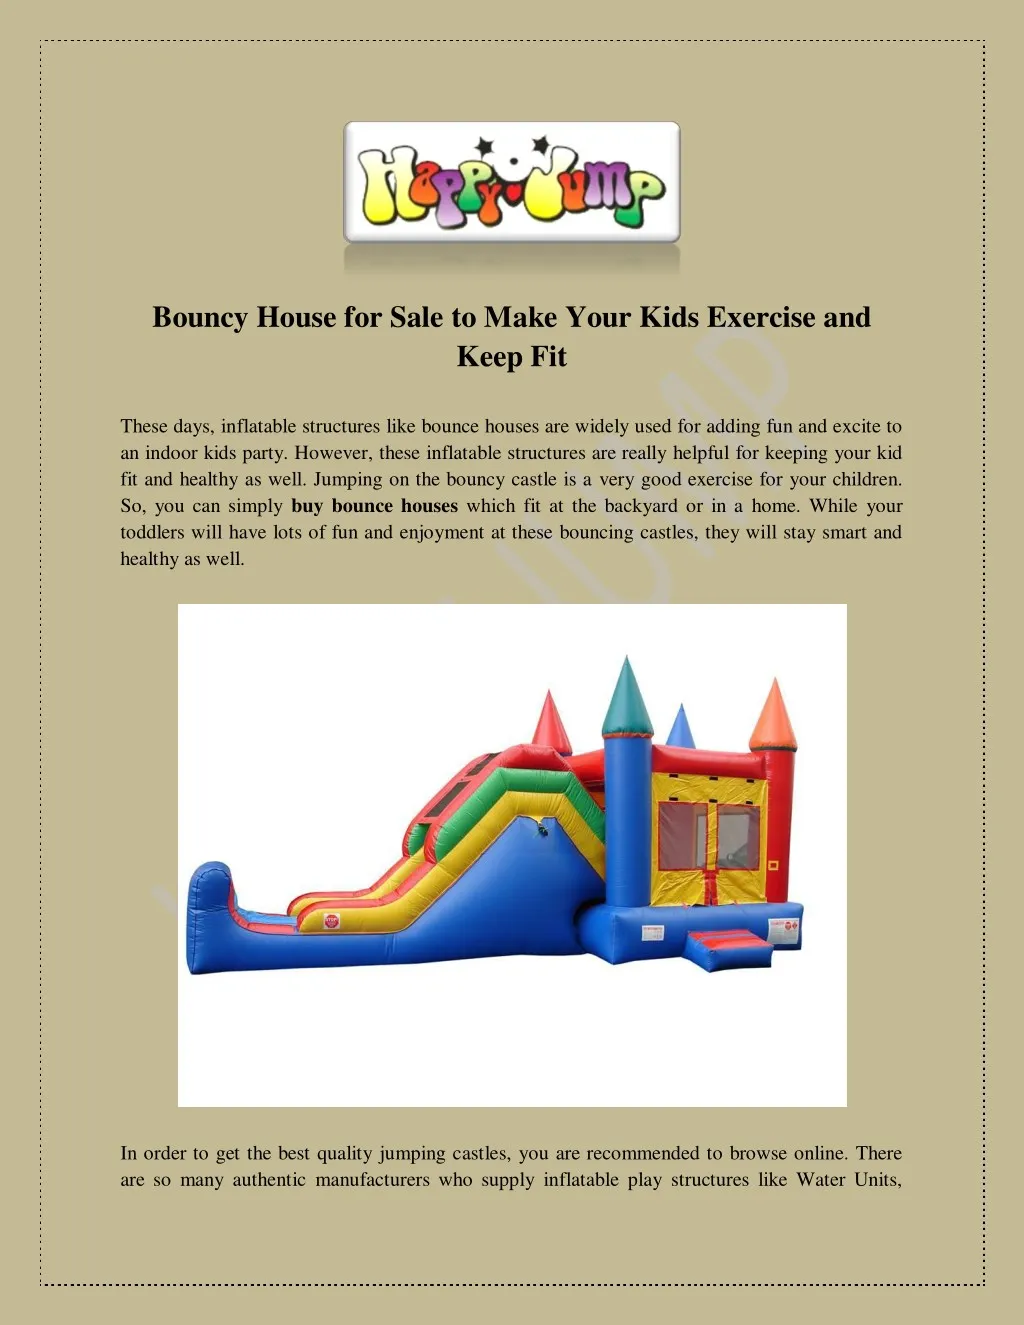 bouncy house for sale to make your kids exercise